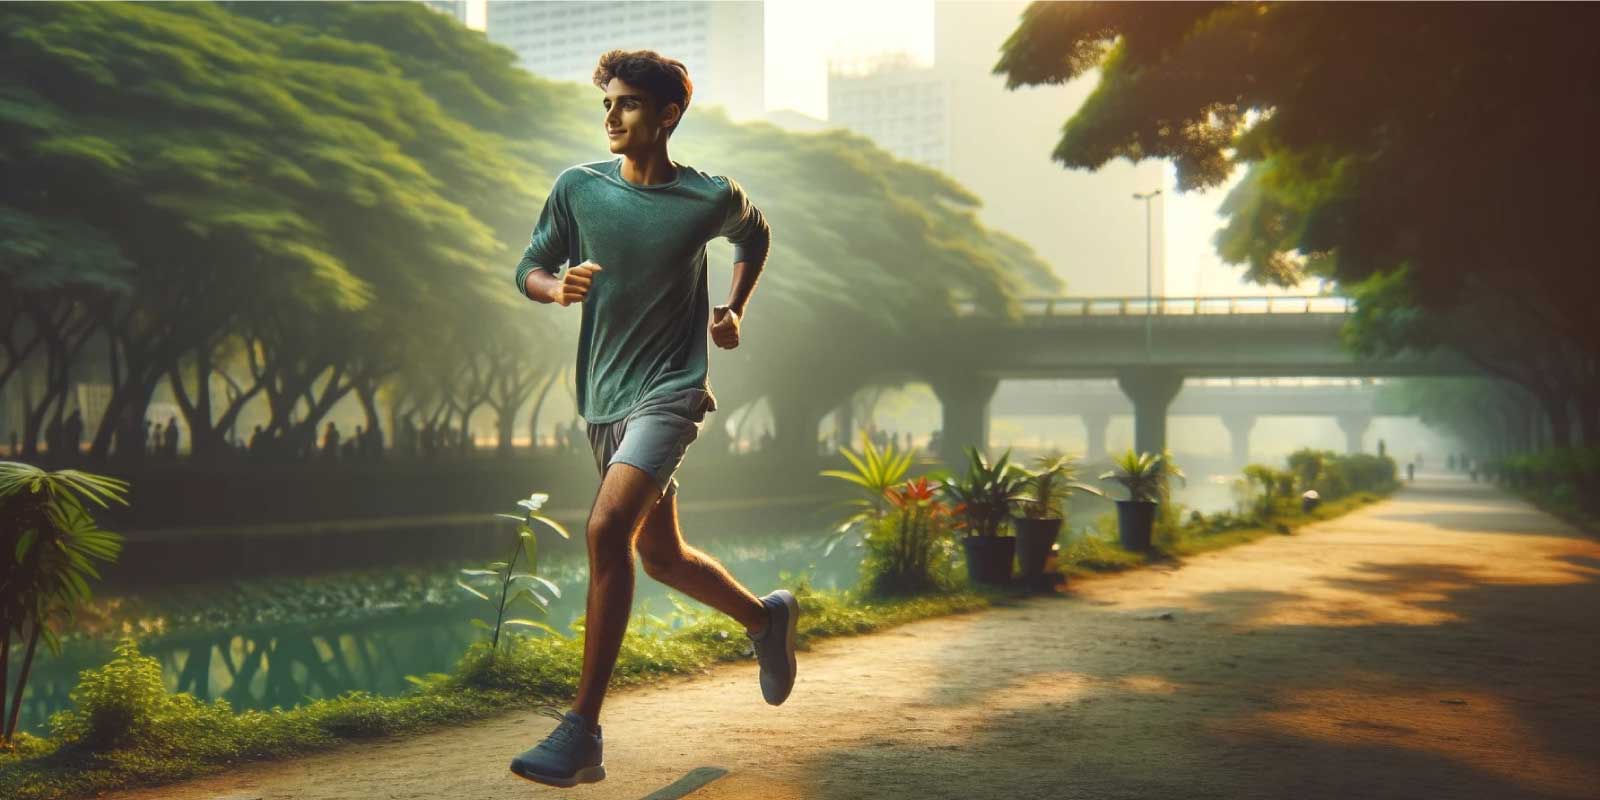 Young man jogging in a sunlit park, embodying adolescent fitness linked to reduced midlife health risks